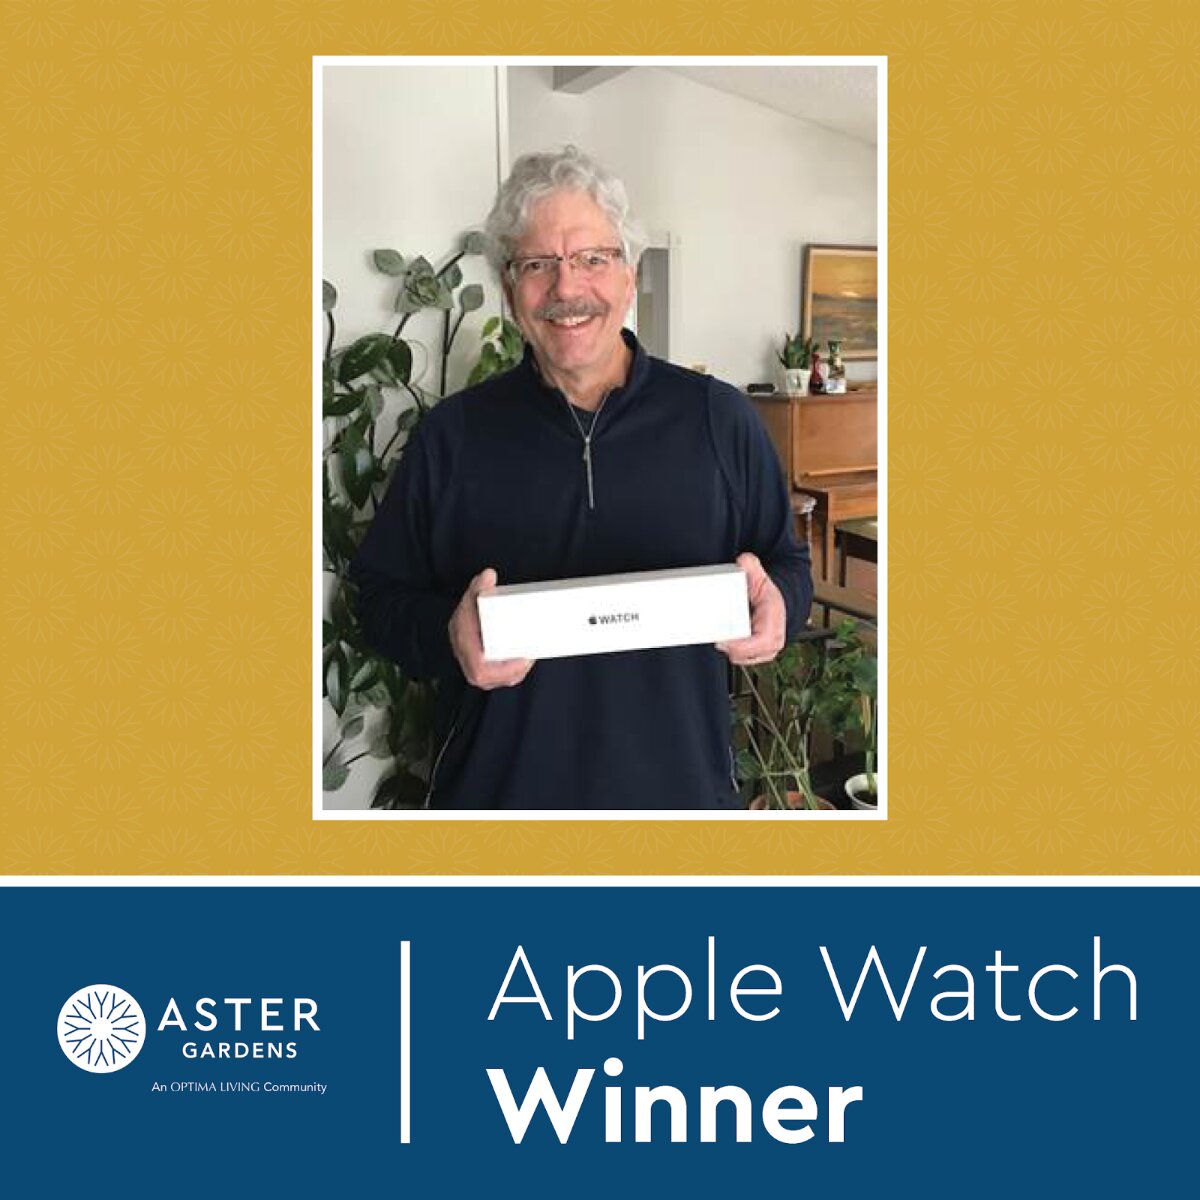 A picture of Apple Watch winner - Henry